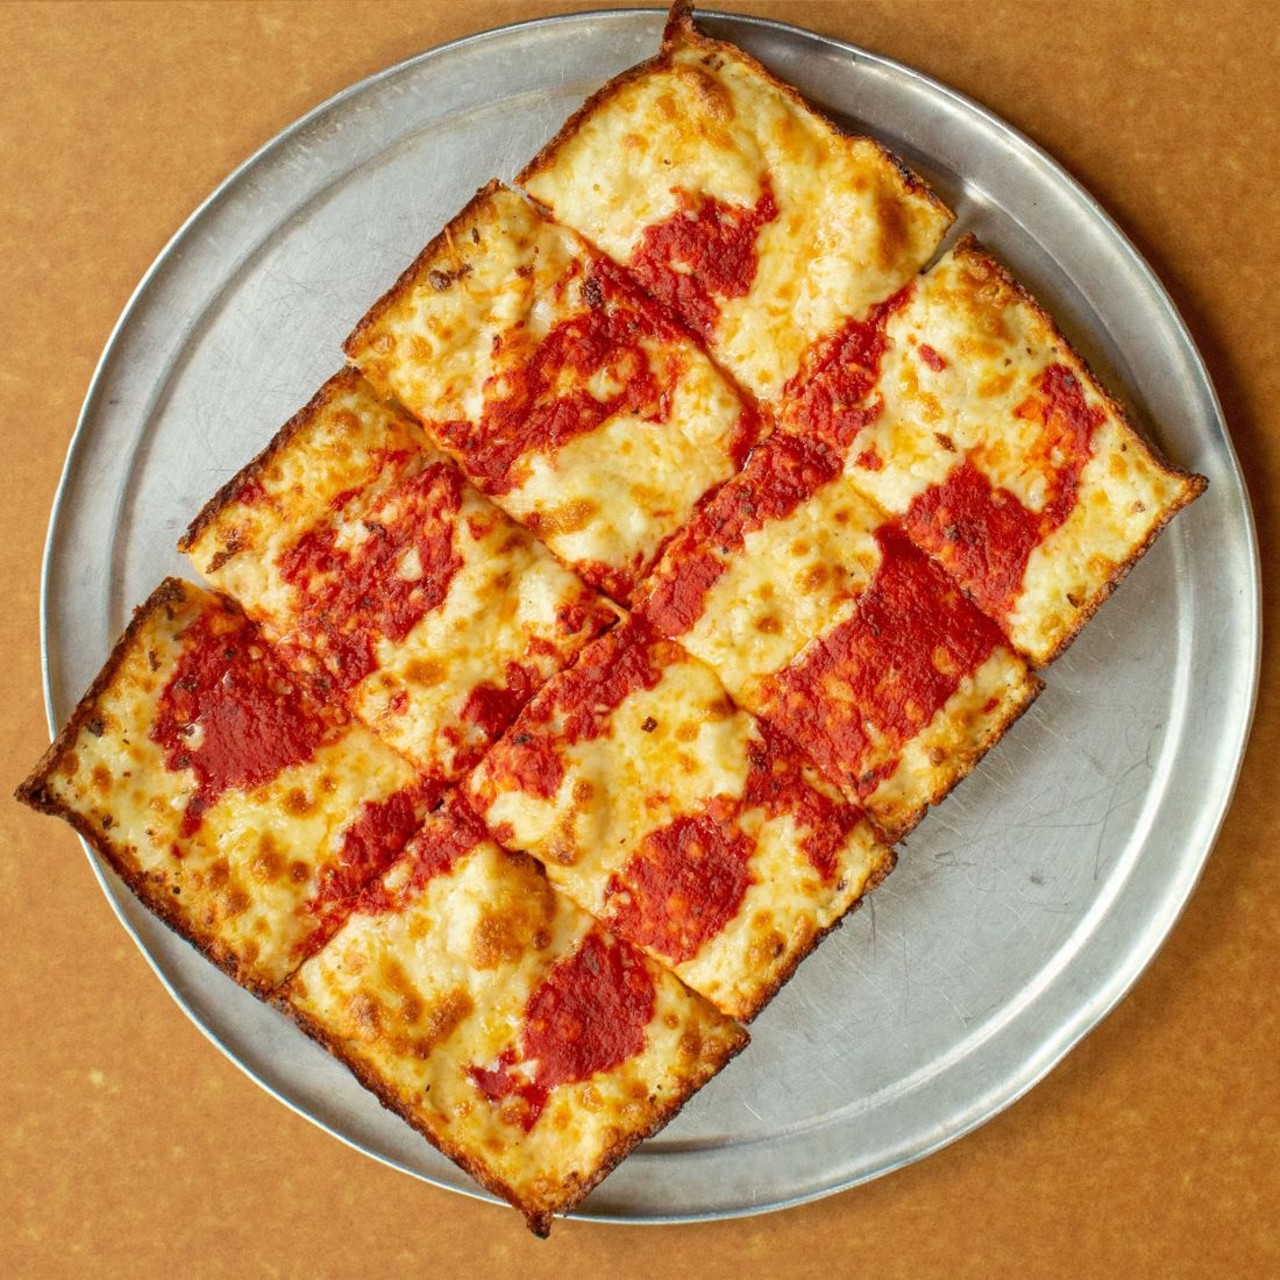 Detroit-style Pizza aka pizza 
It cannot be denied: Detroit-style pizza is having a moment &#151; and not just here on its home turf but across the globe, with folks copping our 70-plus-years-old Sicilian-inspired recipe. There are a few essential steps in a perfect Detroit-style pie: A rectangular pizza pan, Wisconsin brick cheddar, and the sauce, which does not hit the dough first, but last. Don&#146;t question it, just do it, bake it, and then eat it.  
Find the recipe here.
Photo via Buddy&#146;s Pizza/Facebook